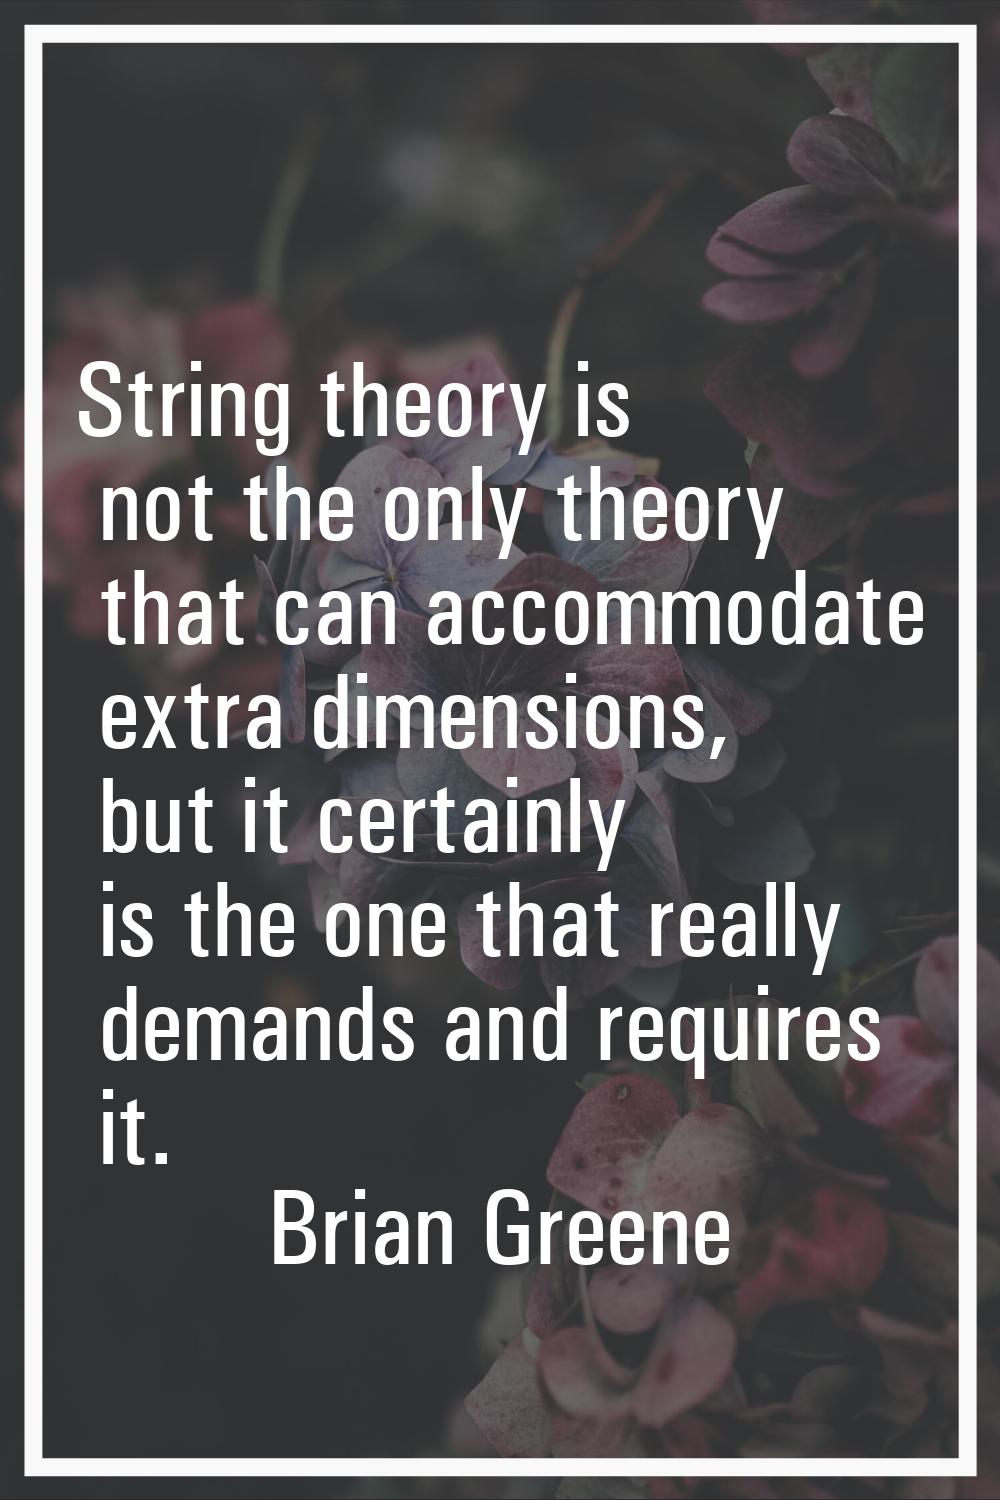 String theory is not the only theory that can accommodate extra dimensions, but it certainly is the